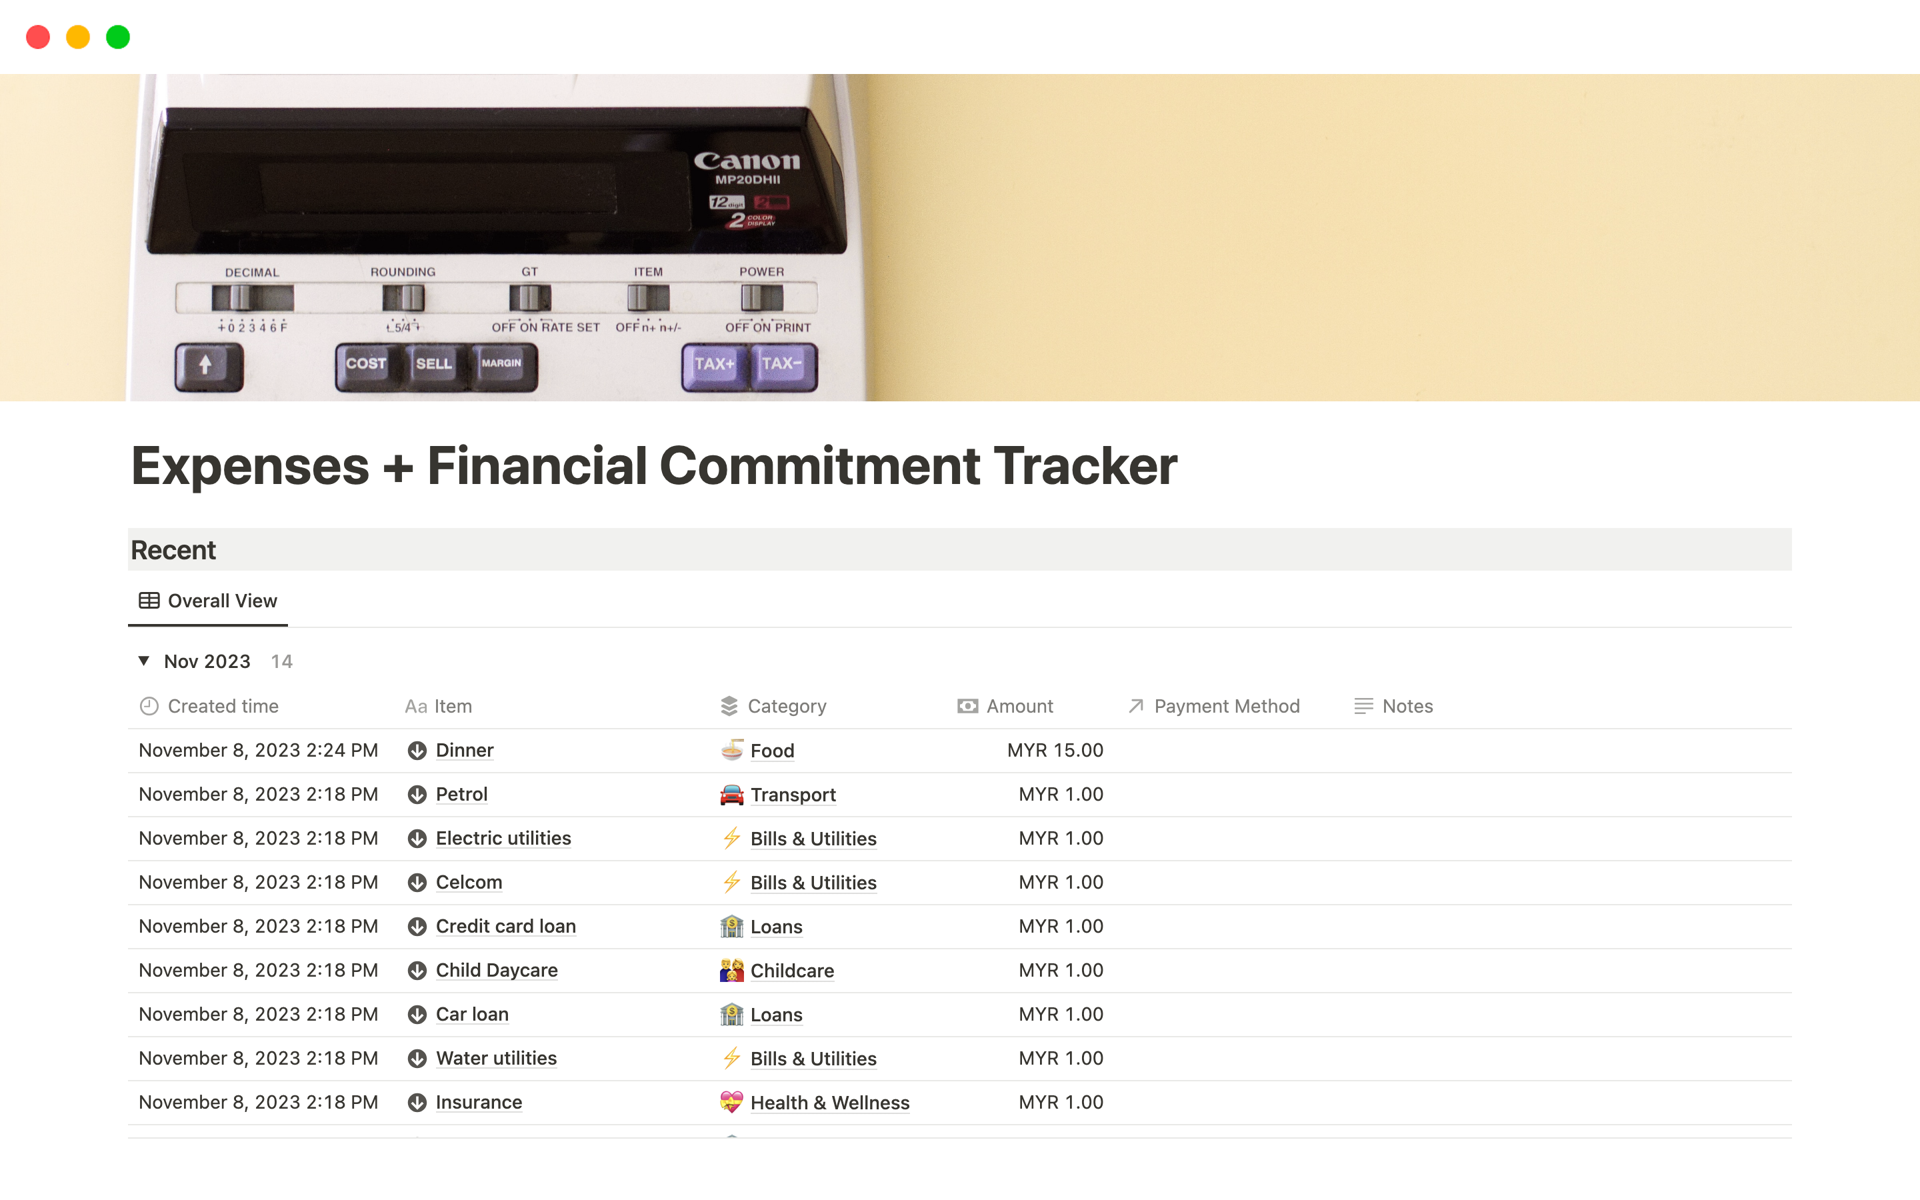 This tracker helps you to track our monthly spending and financial commitment.